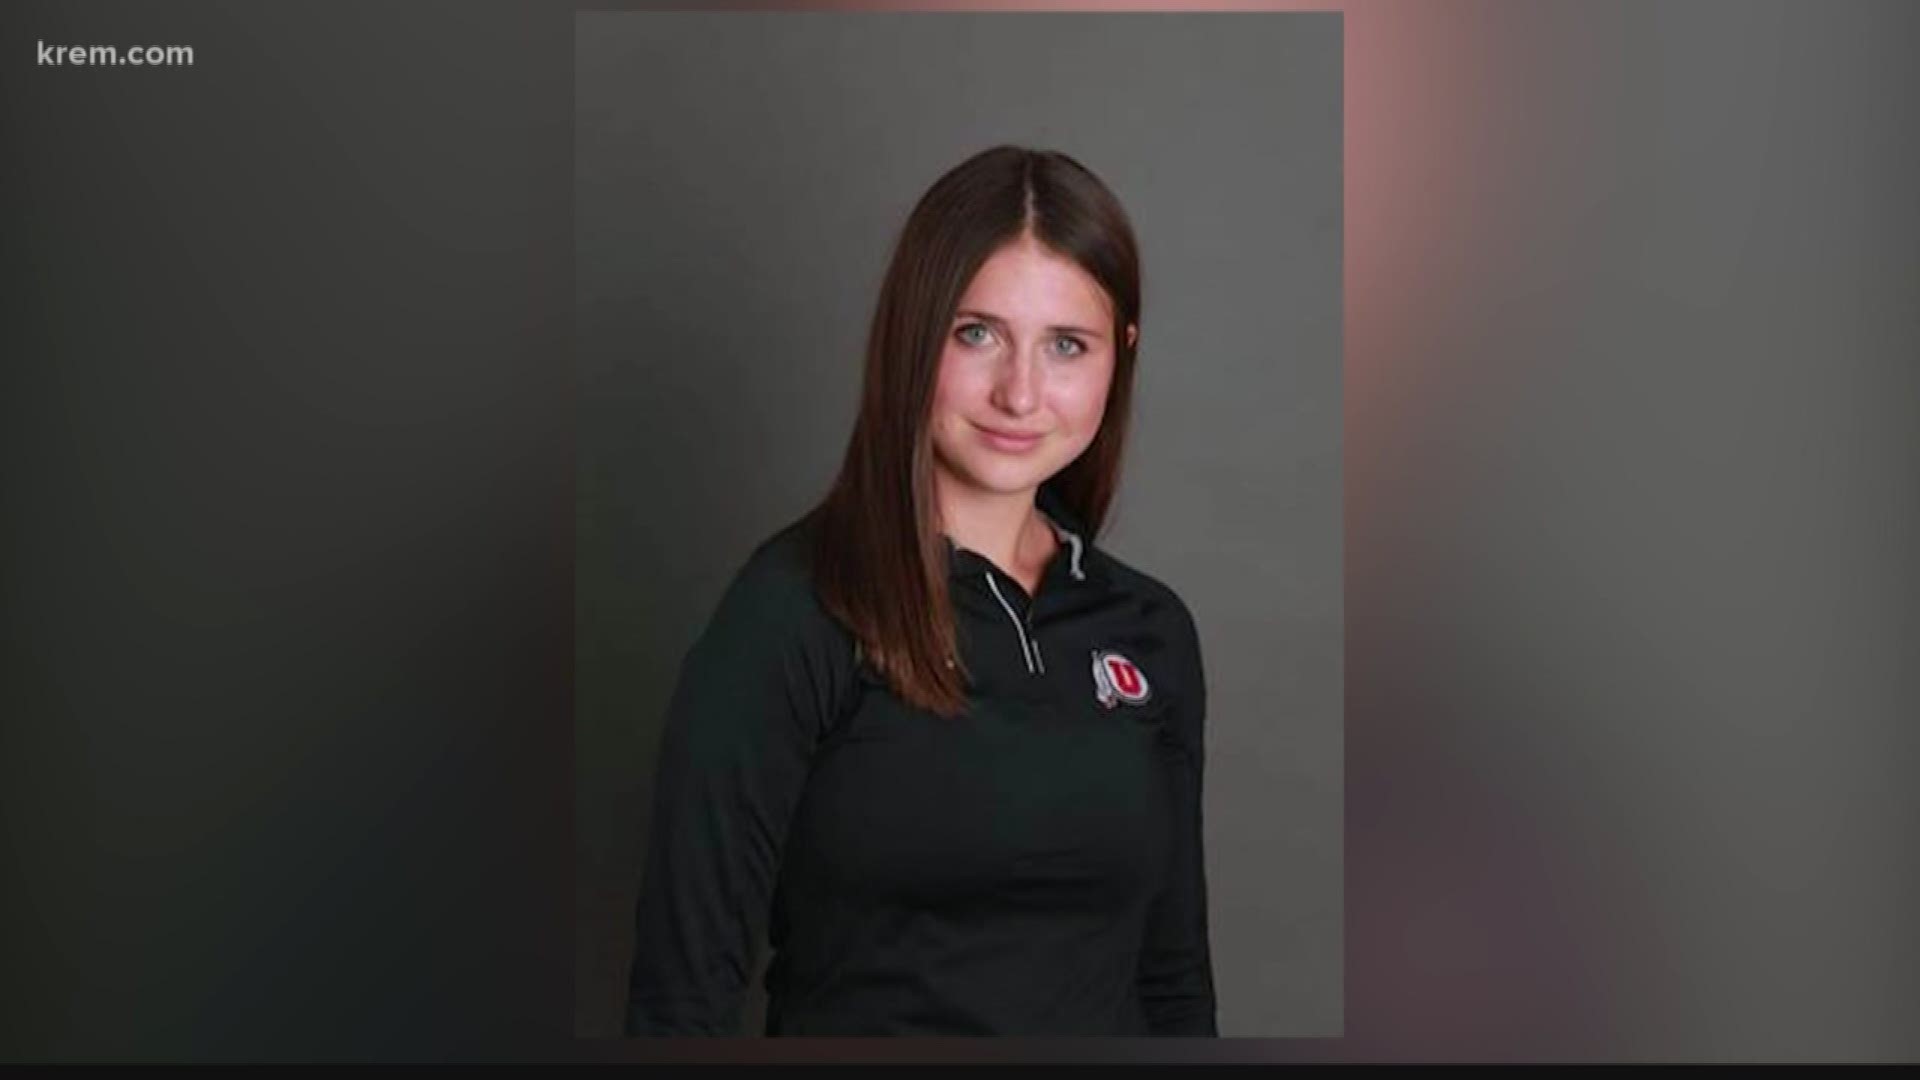 University of Utah student Lauren McCluskey, a Pullman native, was shot and killed on campus in Oct. 2018. Her parents say McCluskey's death was preventable.